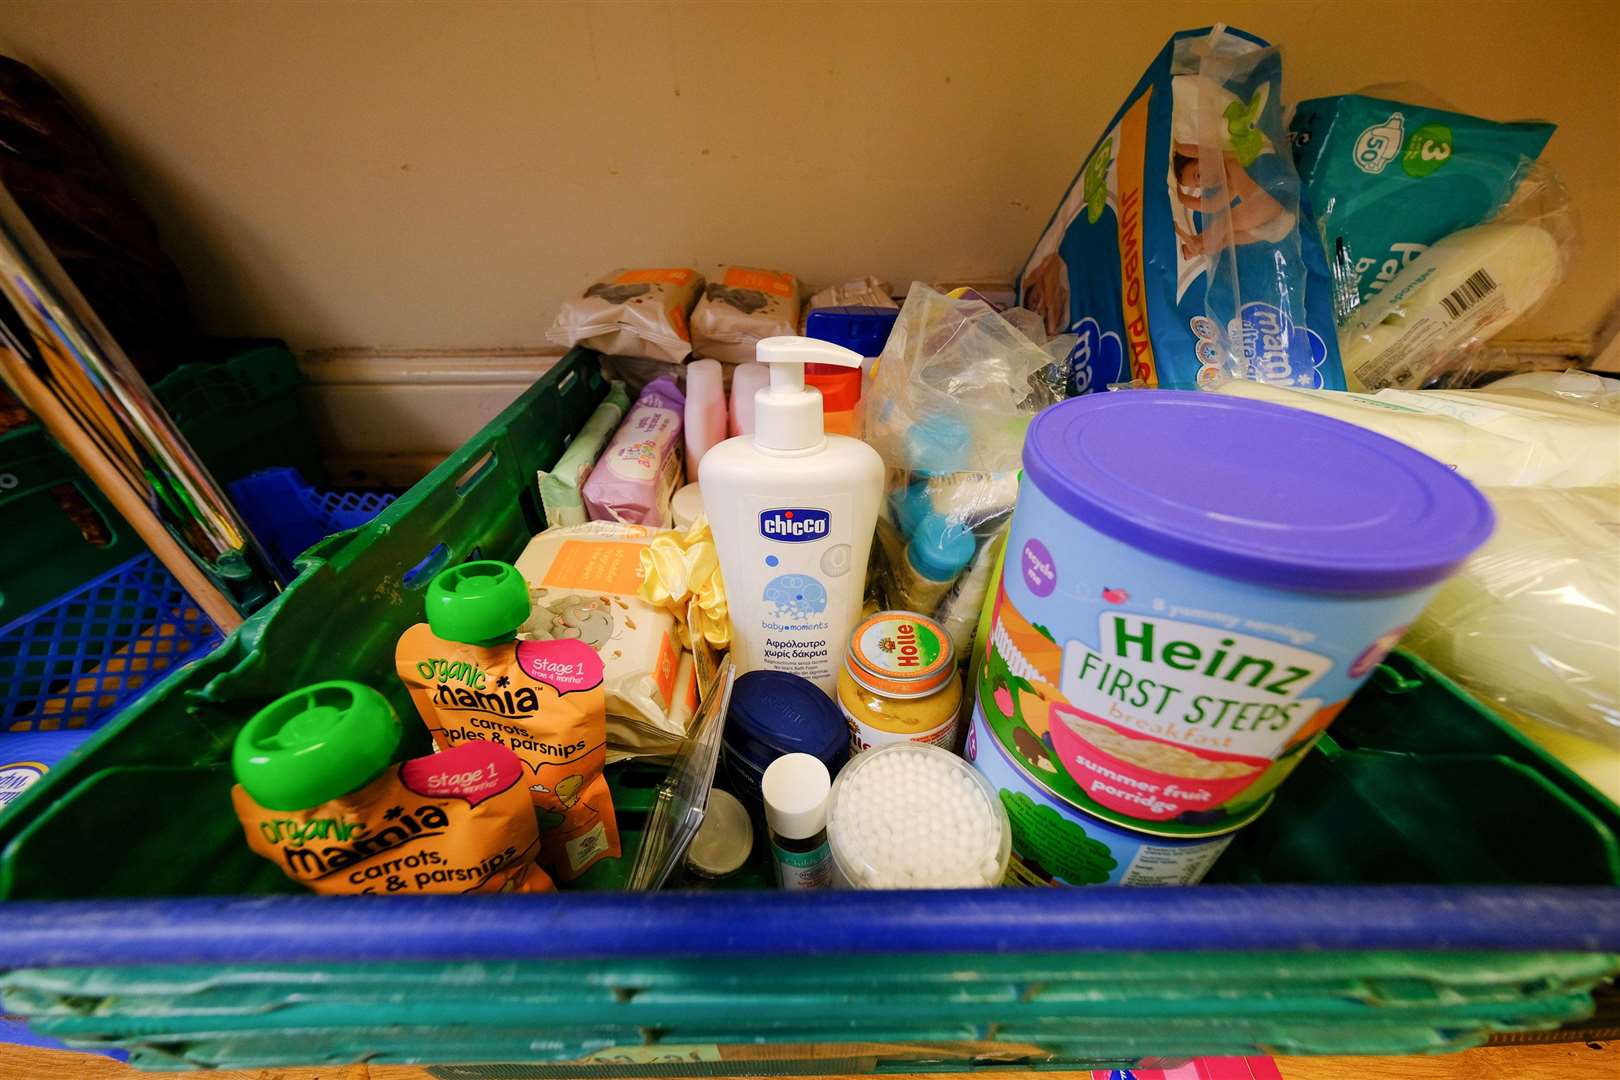 Essential items in a food bank tray. Stock image